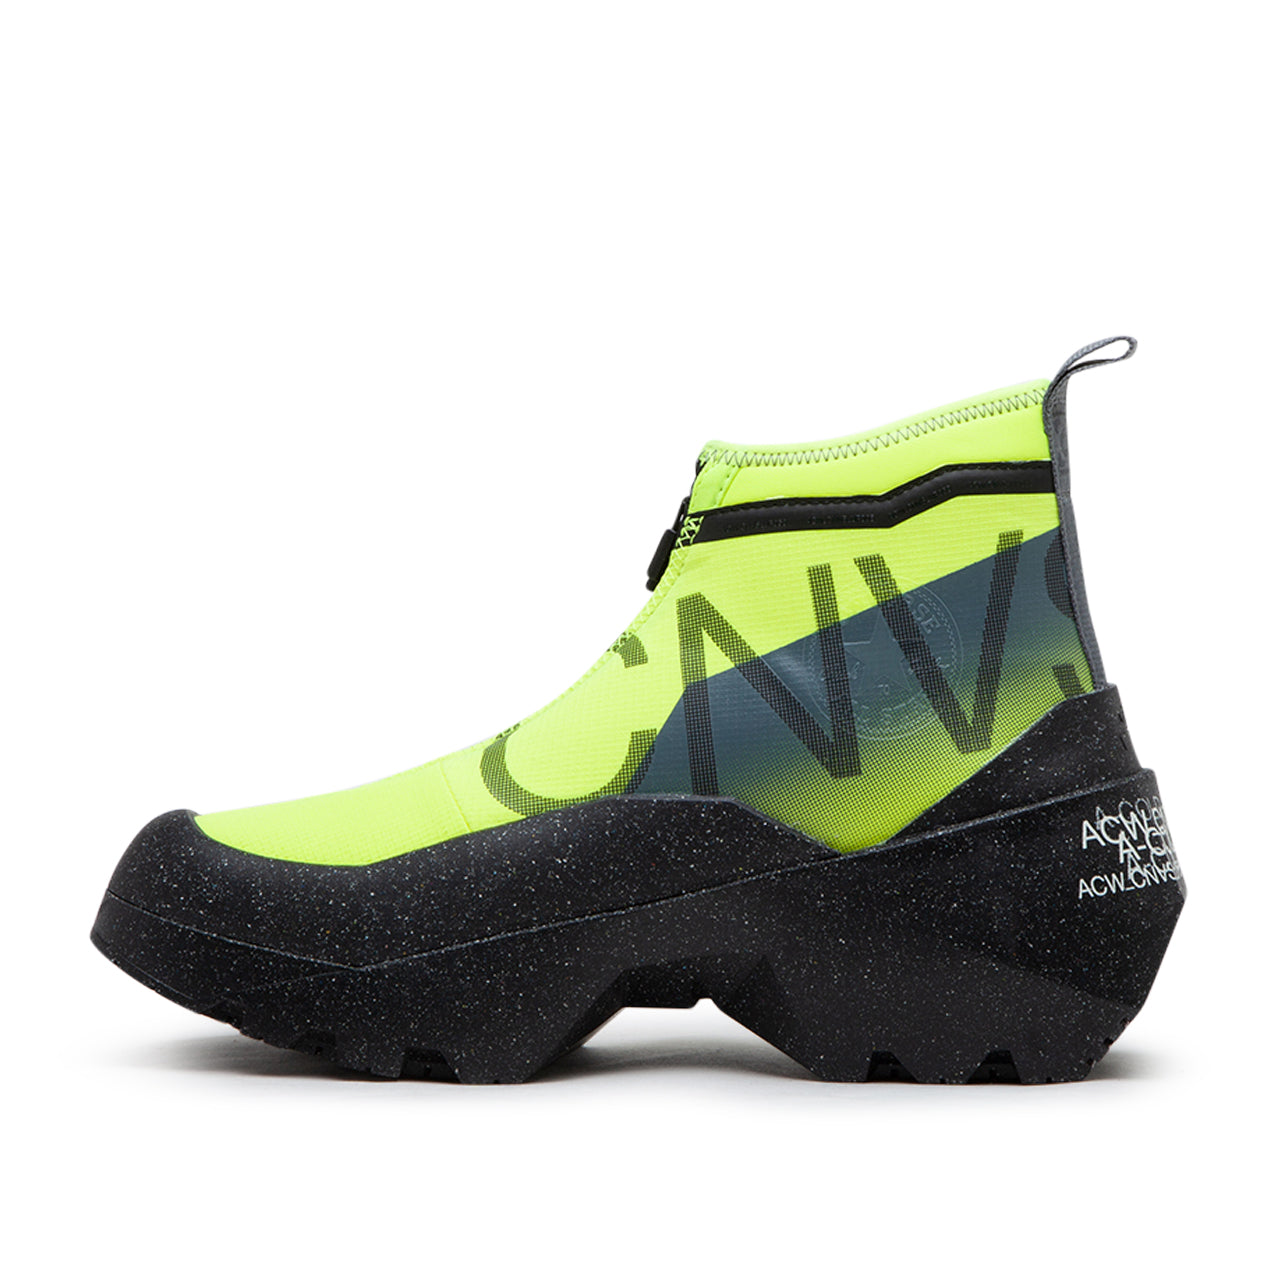 converse x a-cold-wall* geo forma boot hi (neon yellow / black)